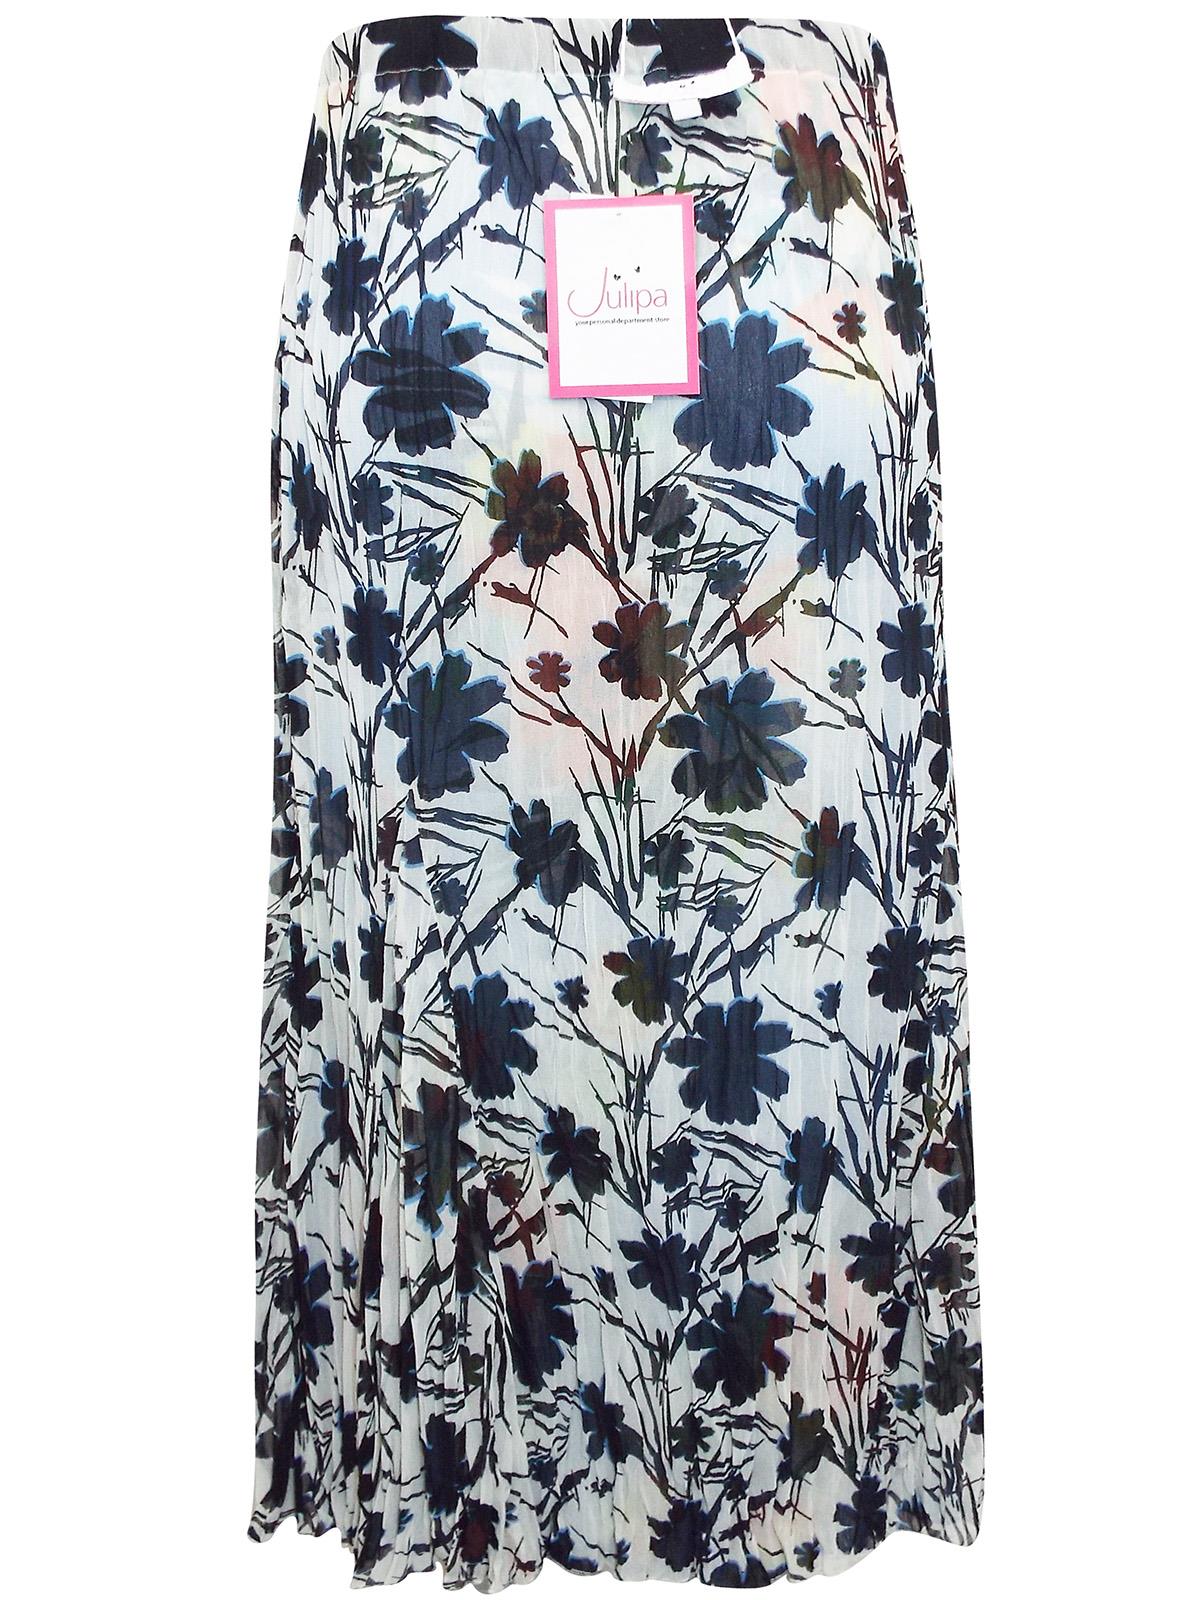 Julipa Reversible Crinkle Skirt Two-Way Summer Holiday Elastic Floral Brand New